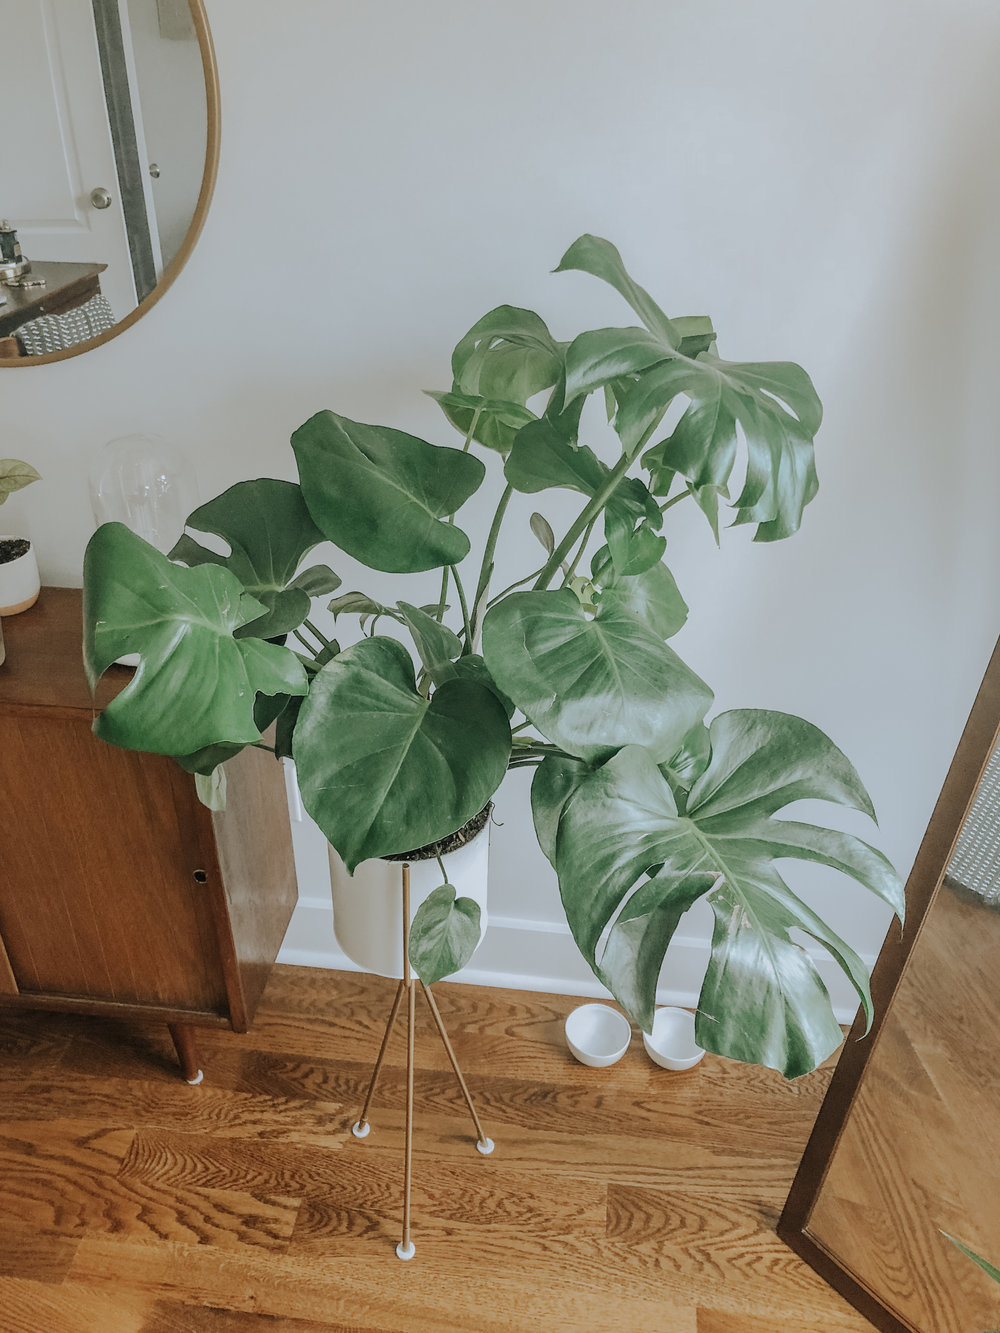 My favorite plant, the gorgeous Monstera.